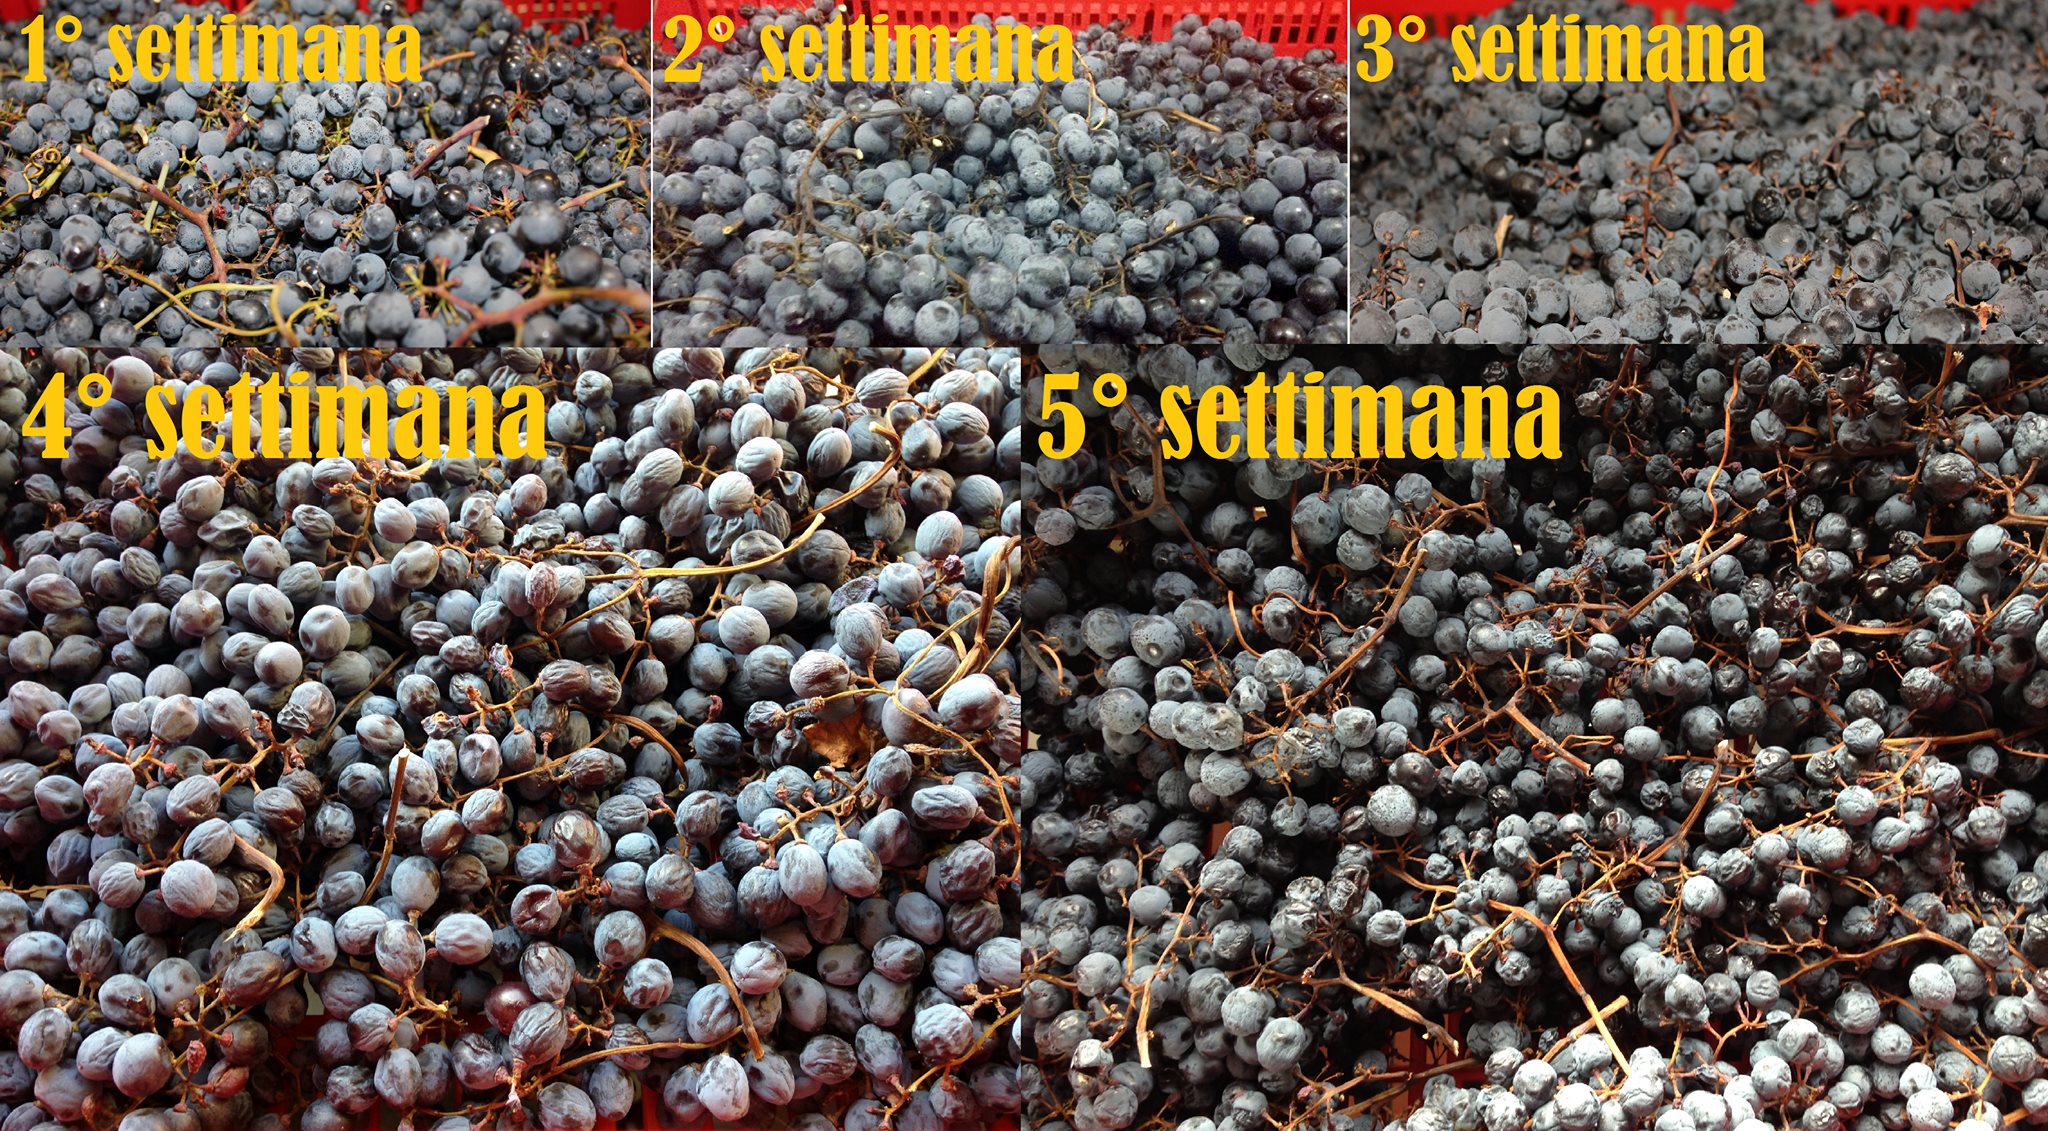 APPASSIMENTO, THE DRYING PROCESS AS DISTINCTIVE TRAIT OF VALPOLICELLA